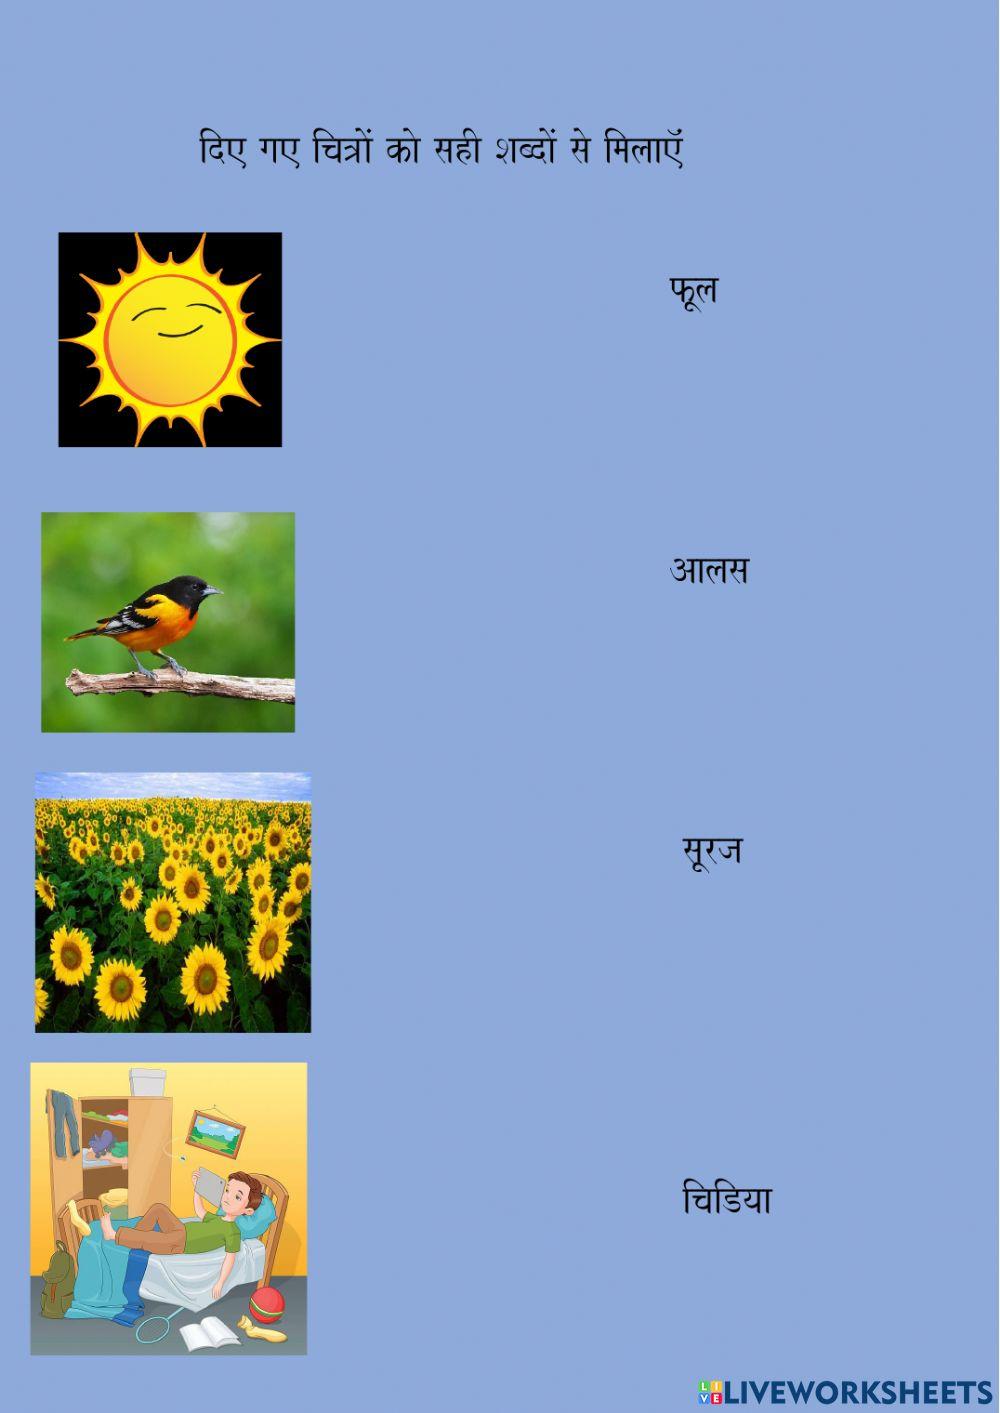 Match the picture with the right word